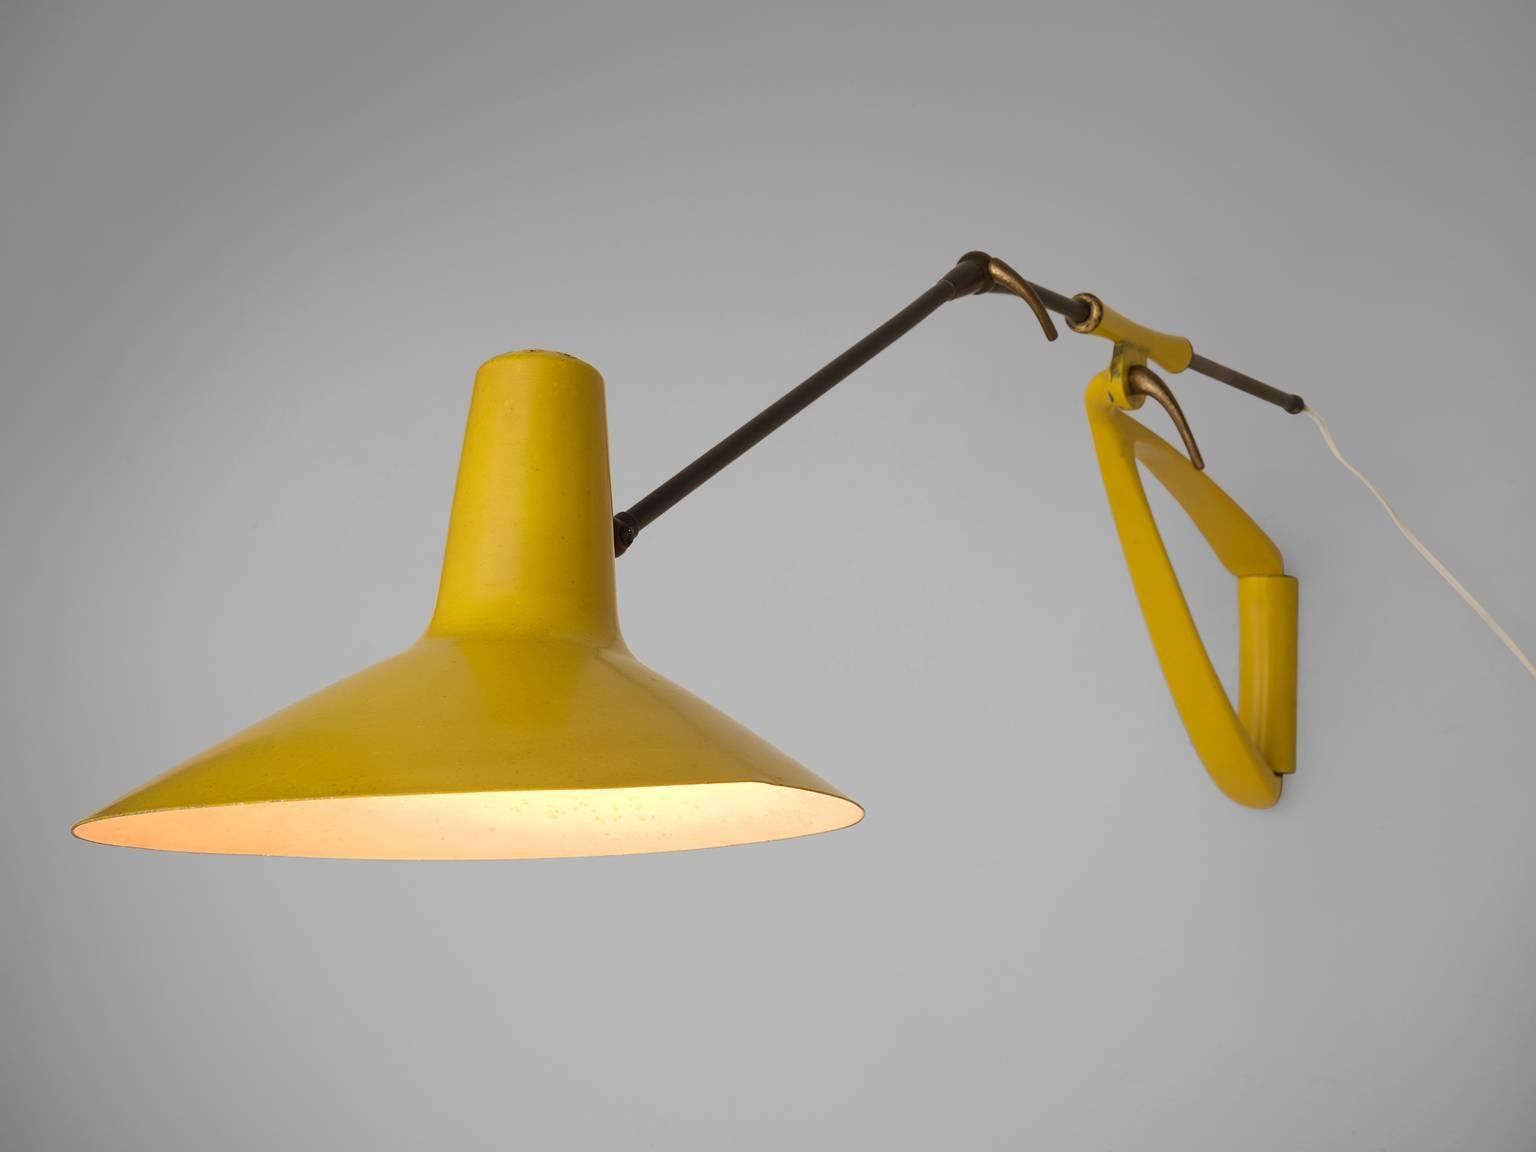 Stilnovo (attributed), wall light, yellow metal and brass, Italy, 1950s

This beautiful deep yellow lamp is executed in lacquered metal and solid brass. The key to the beauty of this lamp is in the open detailed of the arm and the delicate shape of